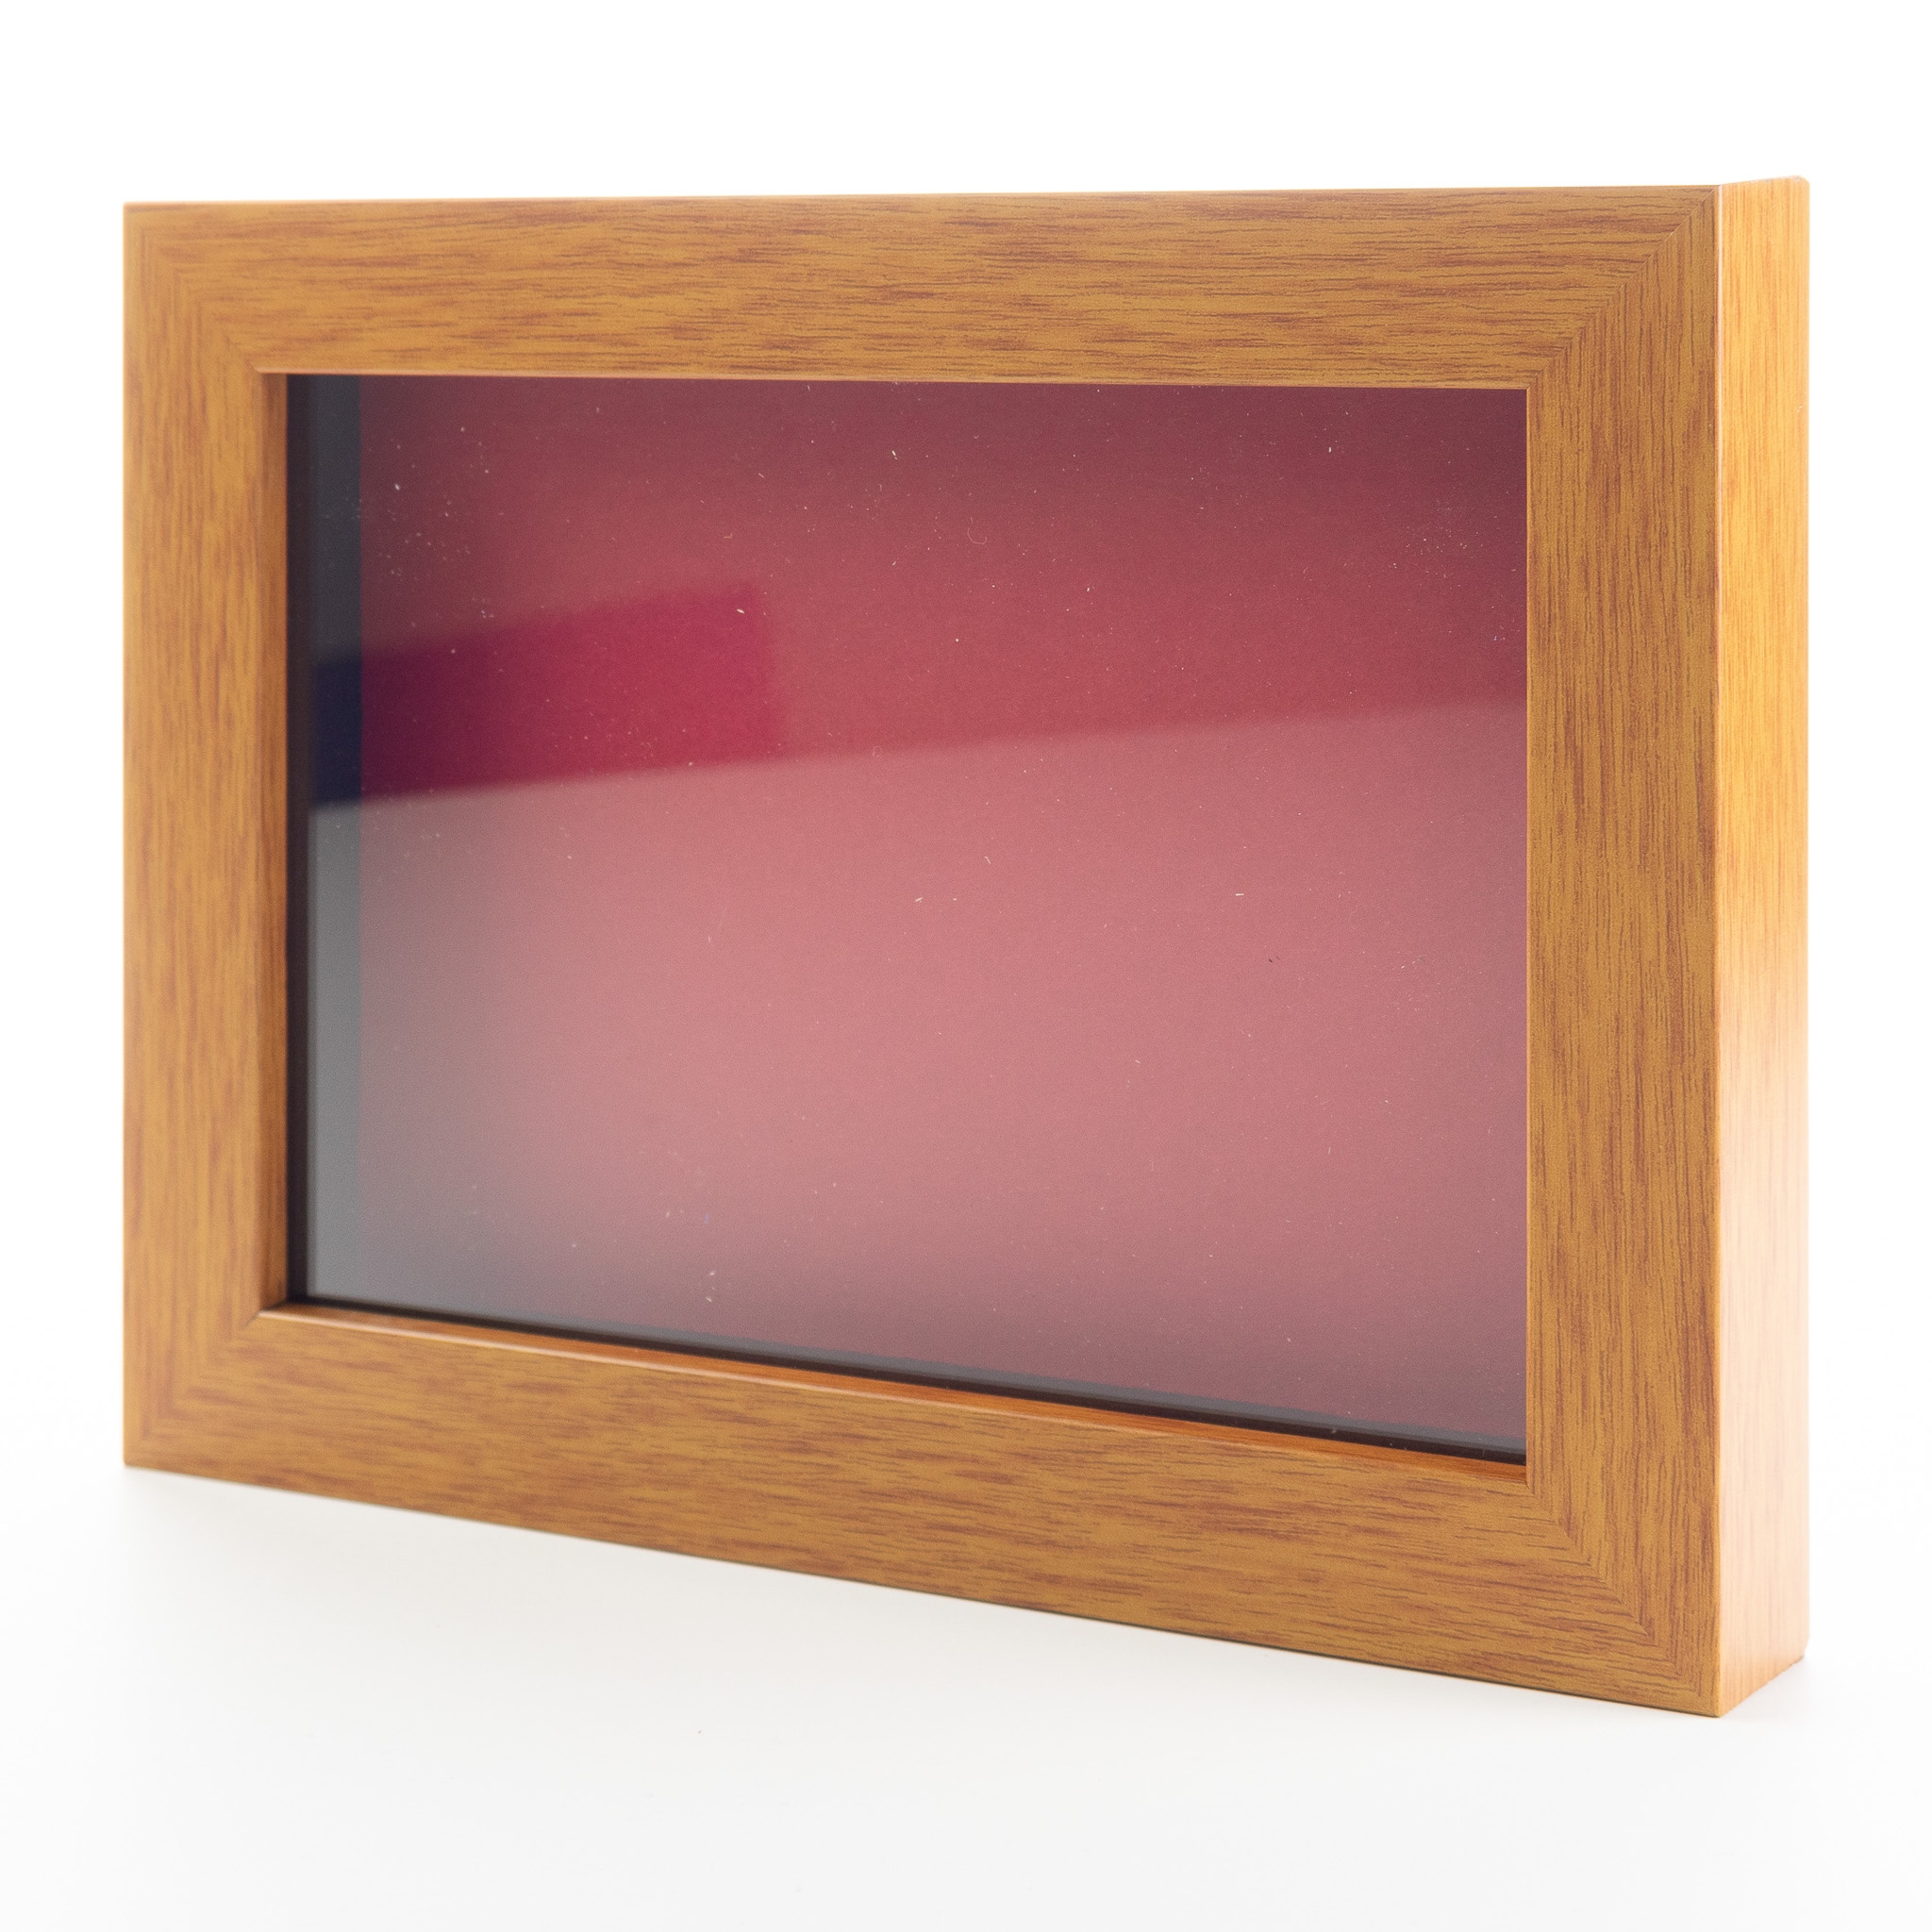 Honey Pecan 8x8 Wood Shadow Box with Red Acid-Free Backing - with 3/4 inch Usable Depth - with UV Acrylic & Hanging, Size: 8 x 8